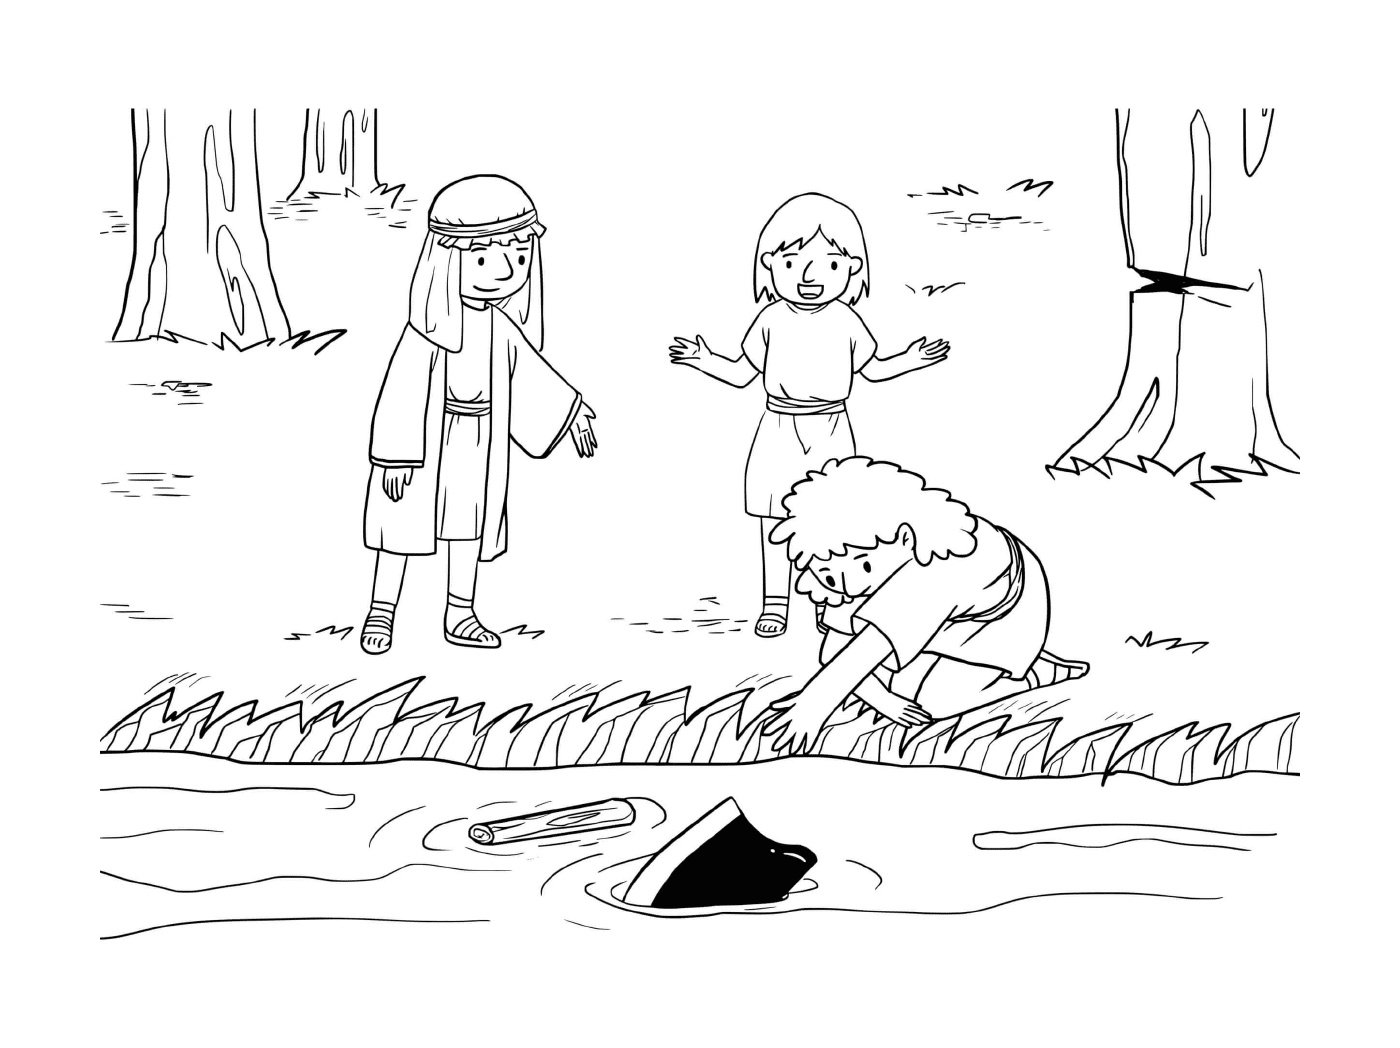  Boy and girl playing in a pond 